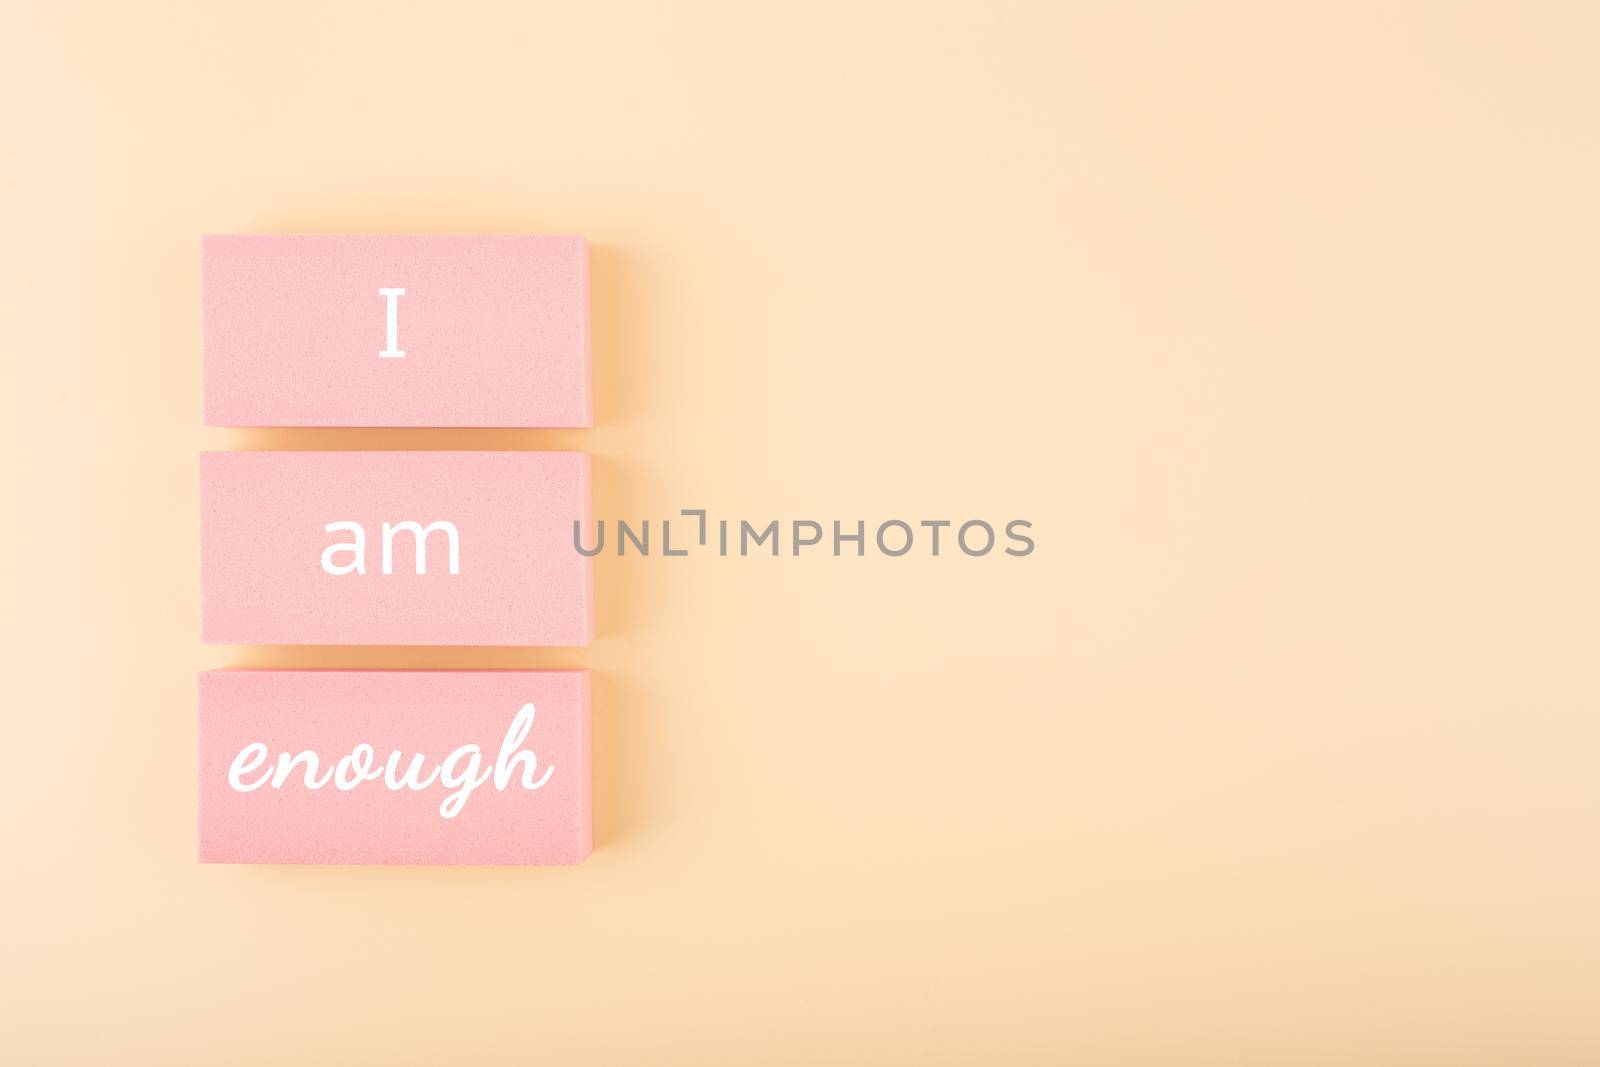 I am enough minimal concept on bright pastel beige background with copy space. Mental health and self love concept